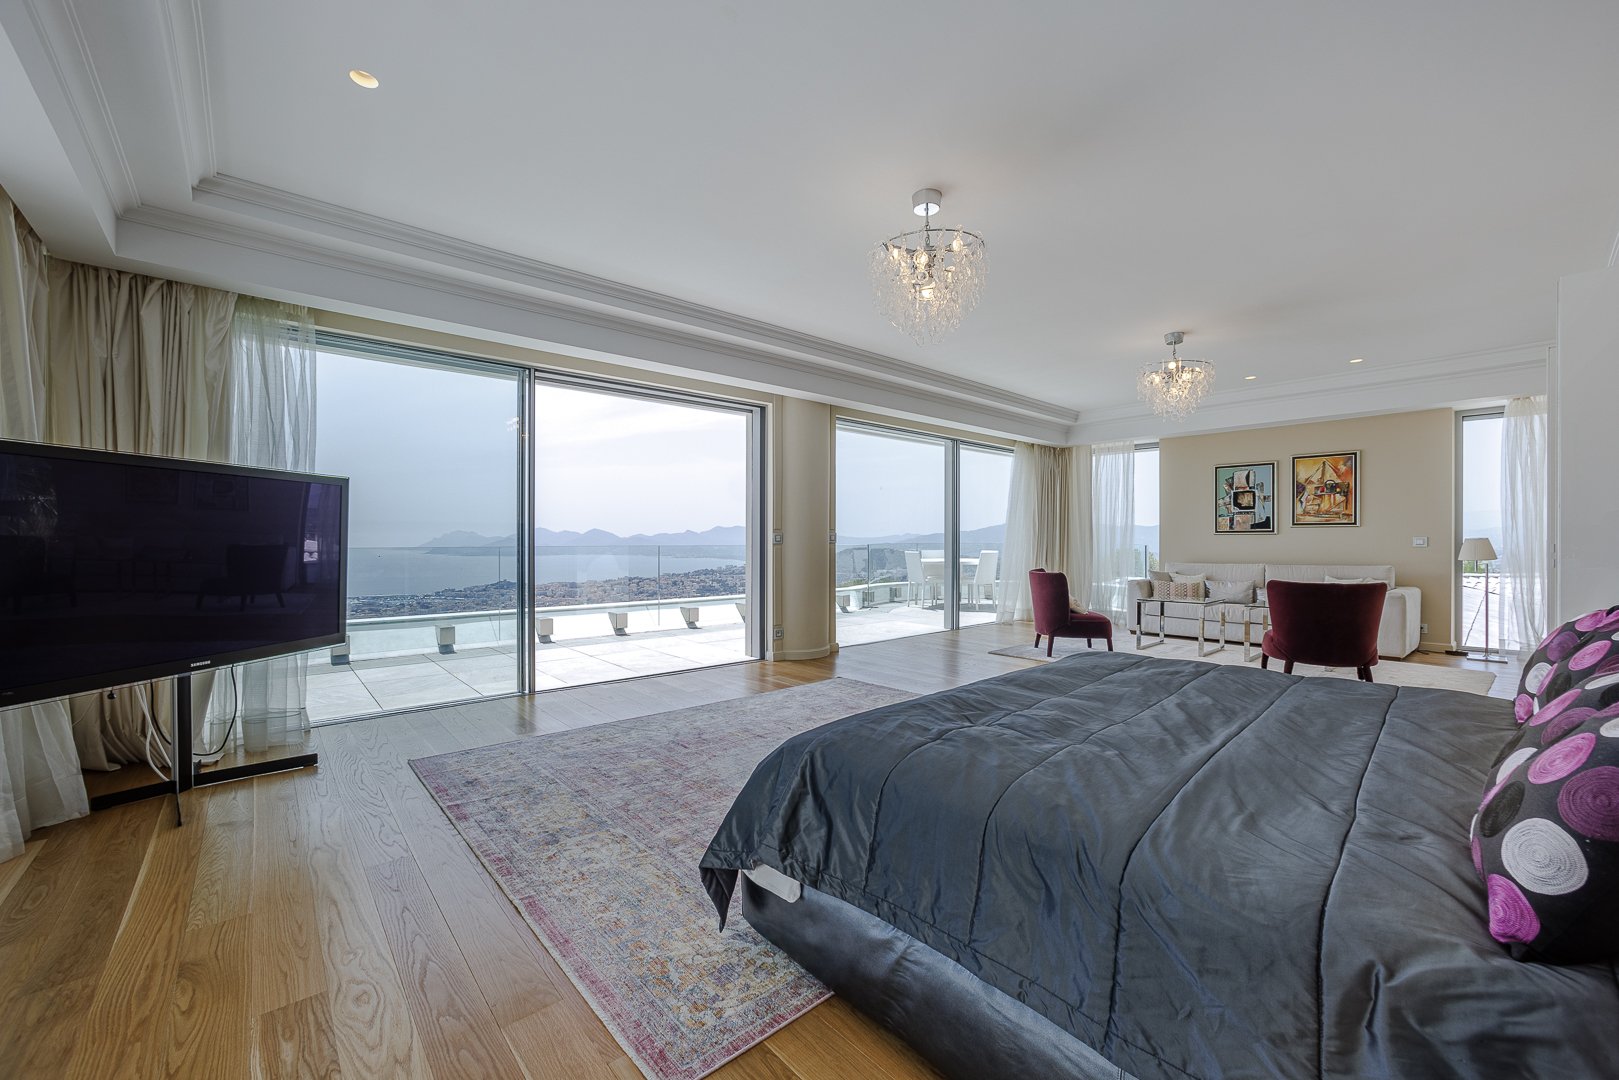 Francis York Luxury Residence in Cannes with Panoramic Sea Views 00005.jpg